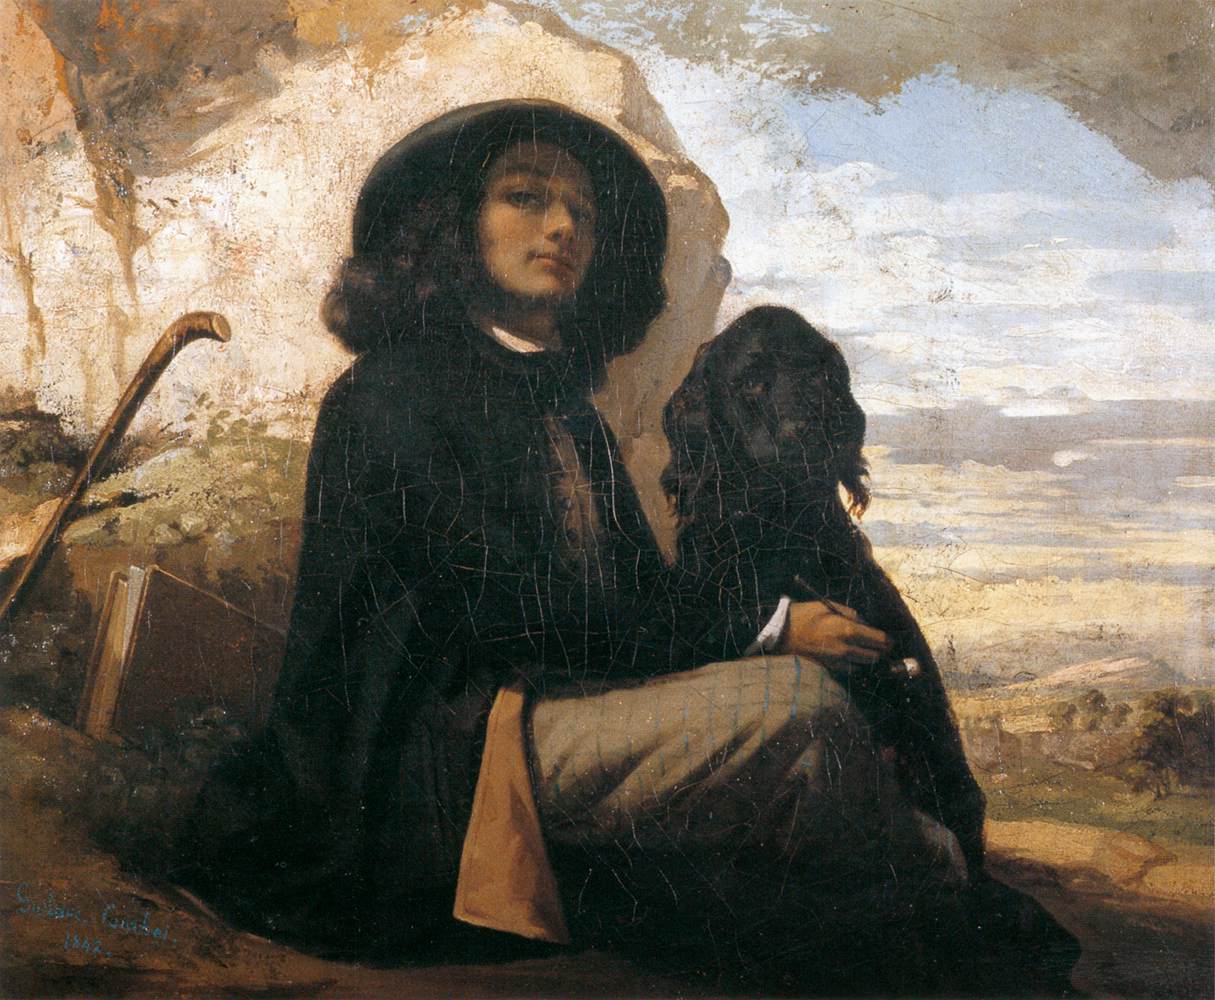 Self-Portrait with Black Dog by Gustave Courbet - between 1842 and 1844 - 46 x 56 cm Petit Palais